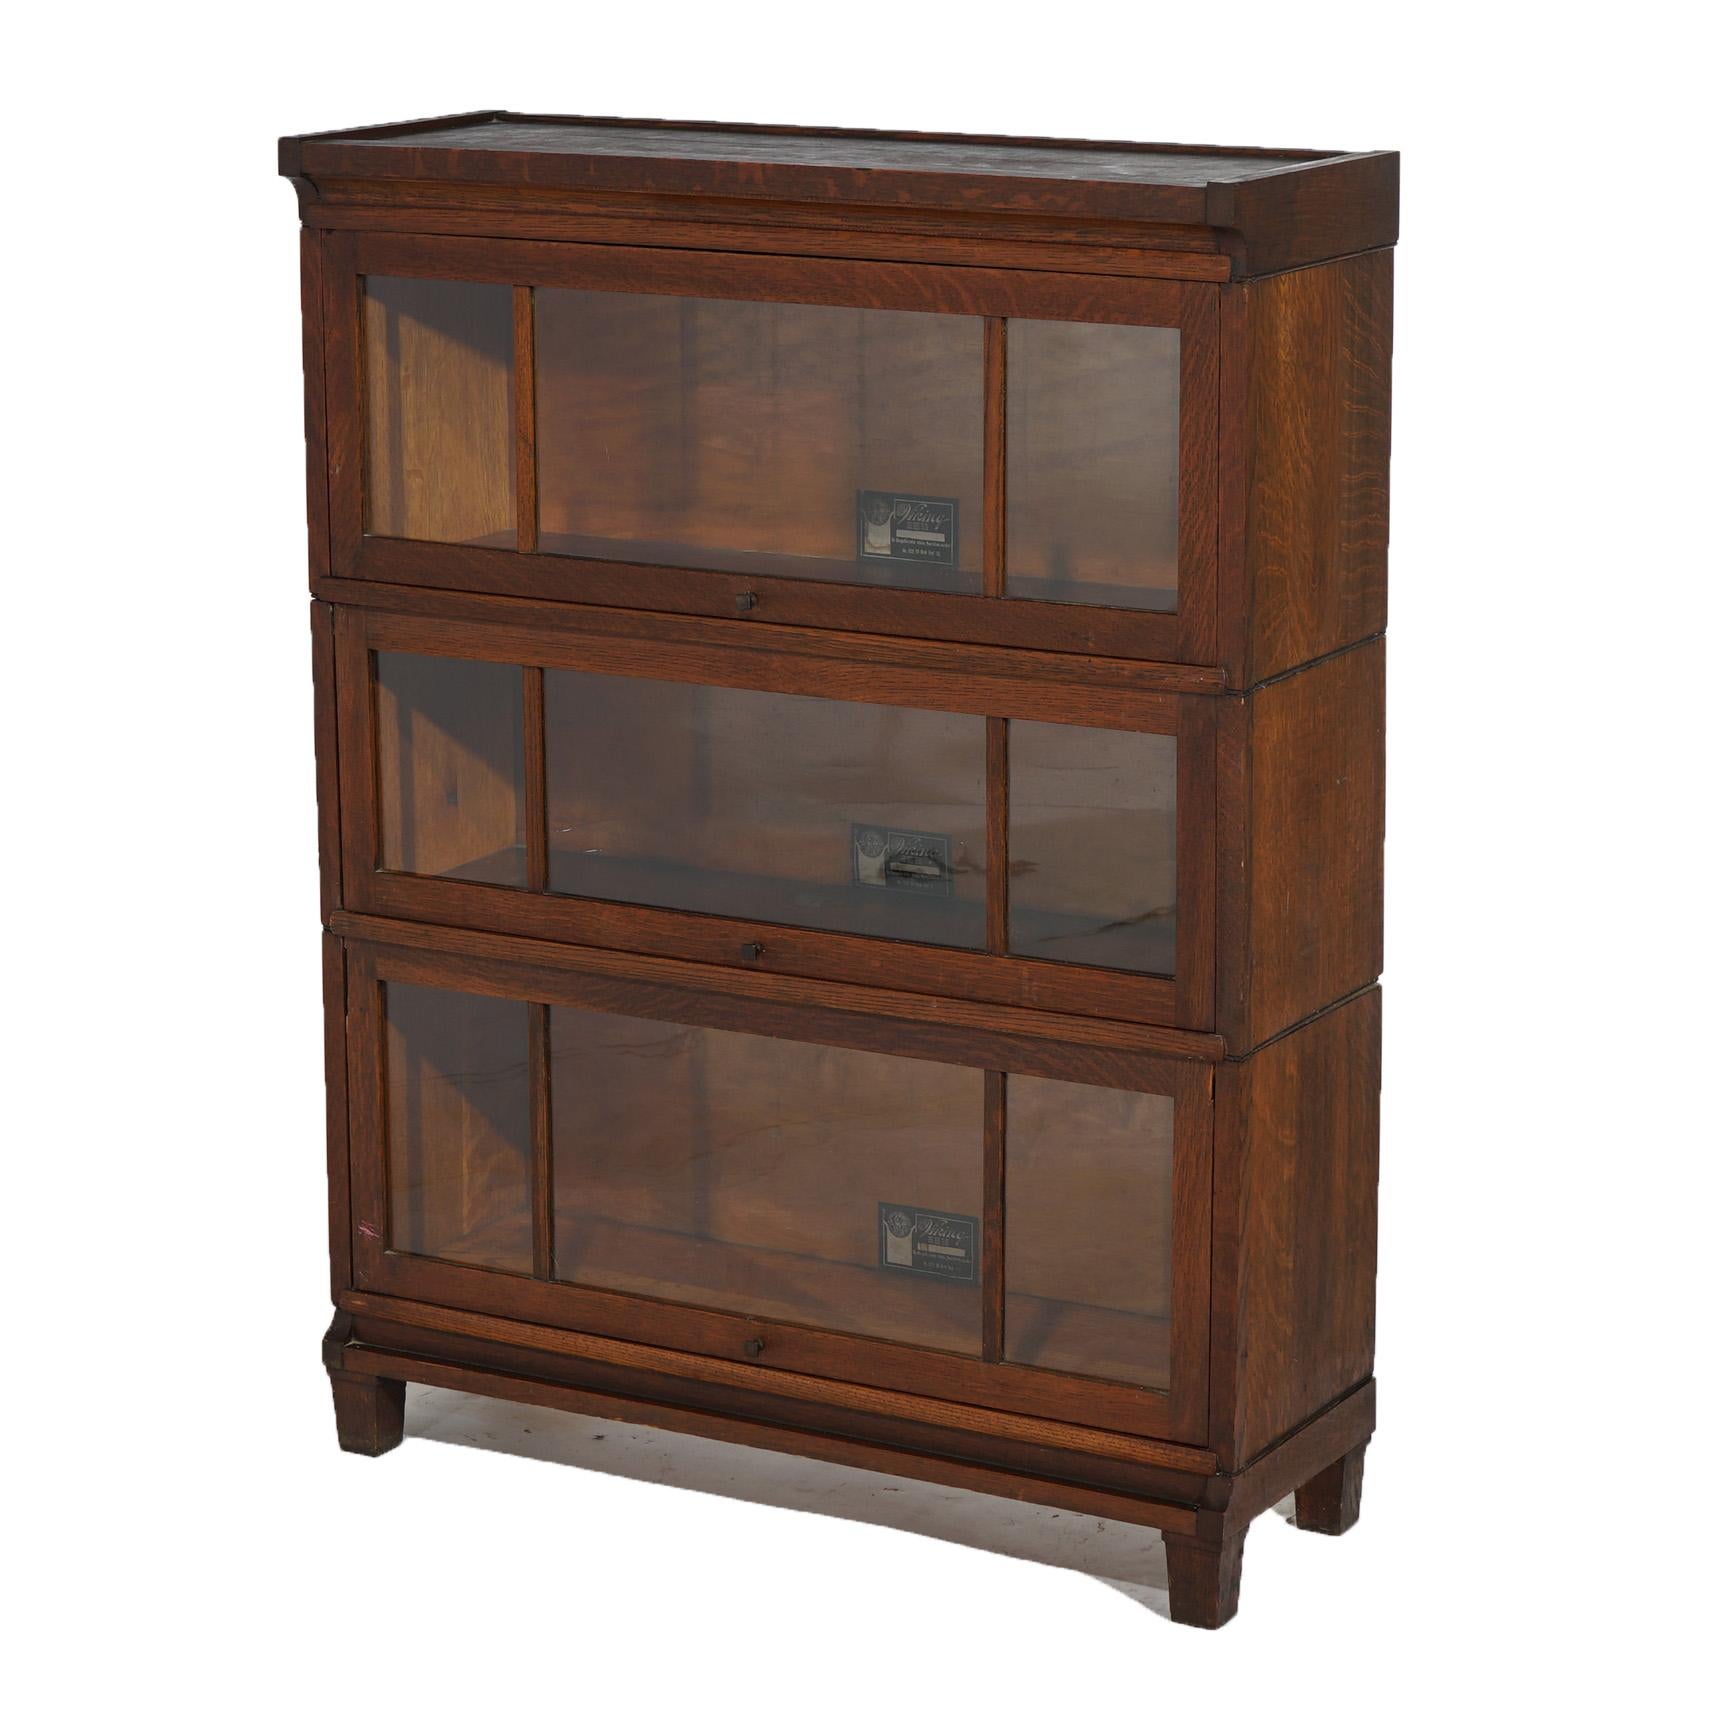 An antique Arts and Crafts barrister bookcase by Viking offers quarter sawn oak construction with three stacks, each having pullout glass doors, raised on square and slightly tapered legs, maker labels as photographed, c1910

Measures - 45